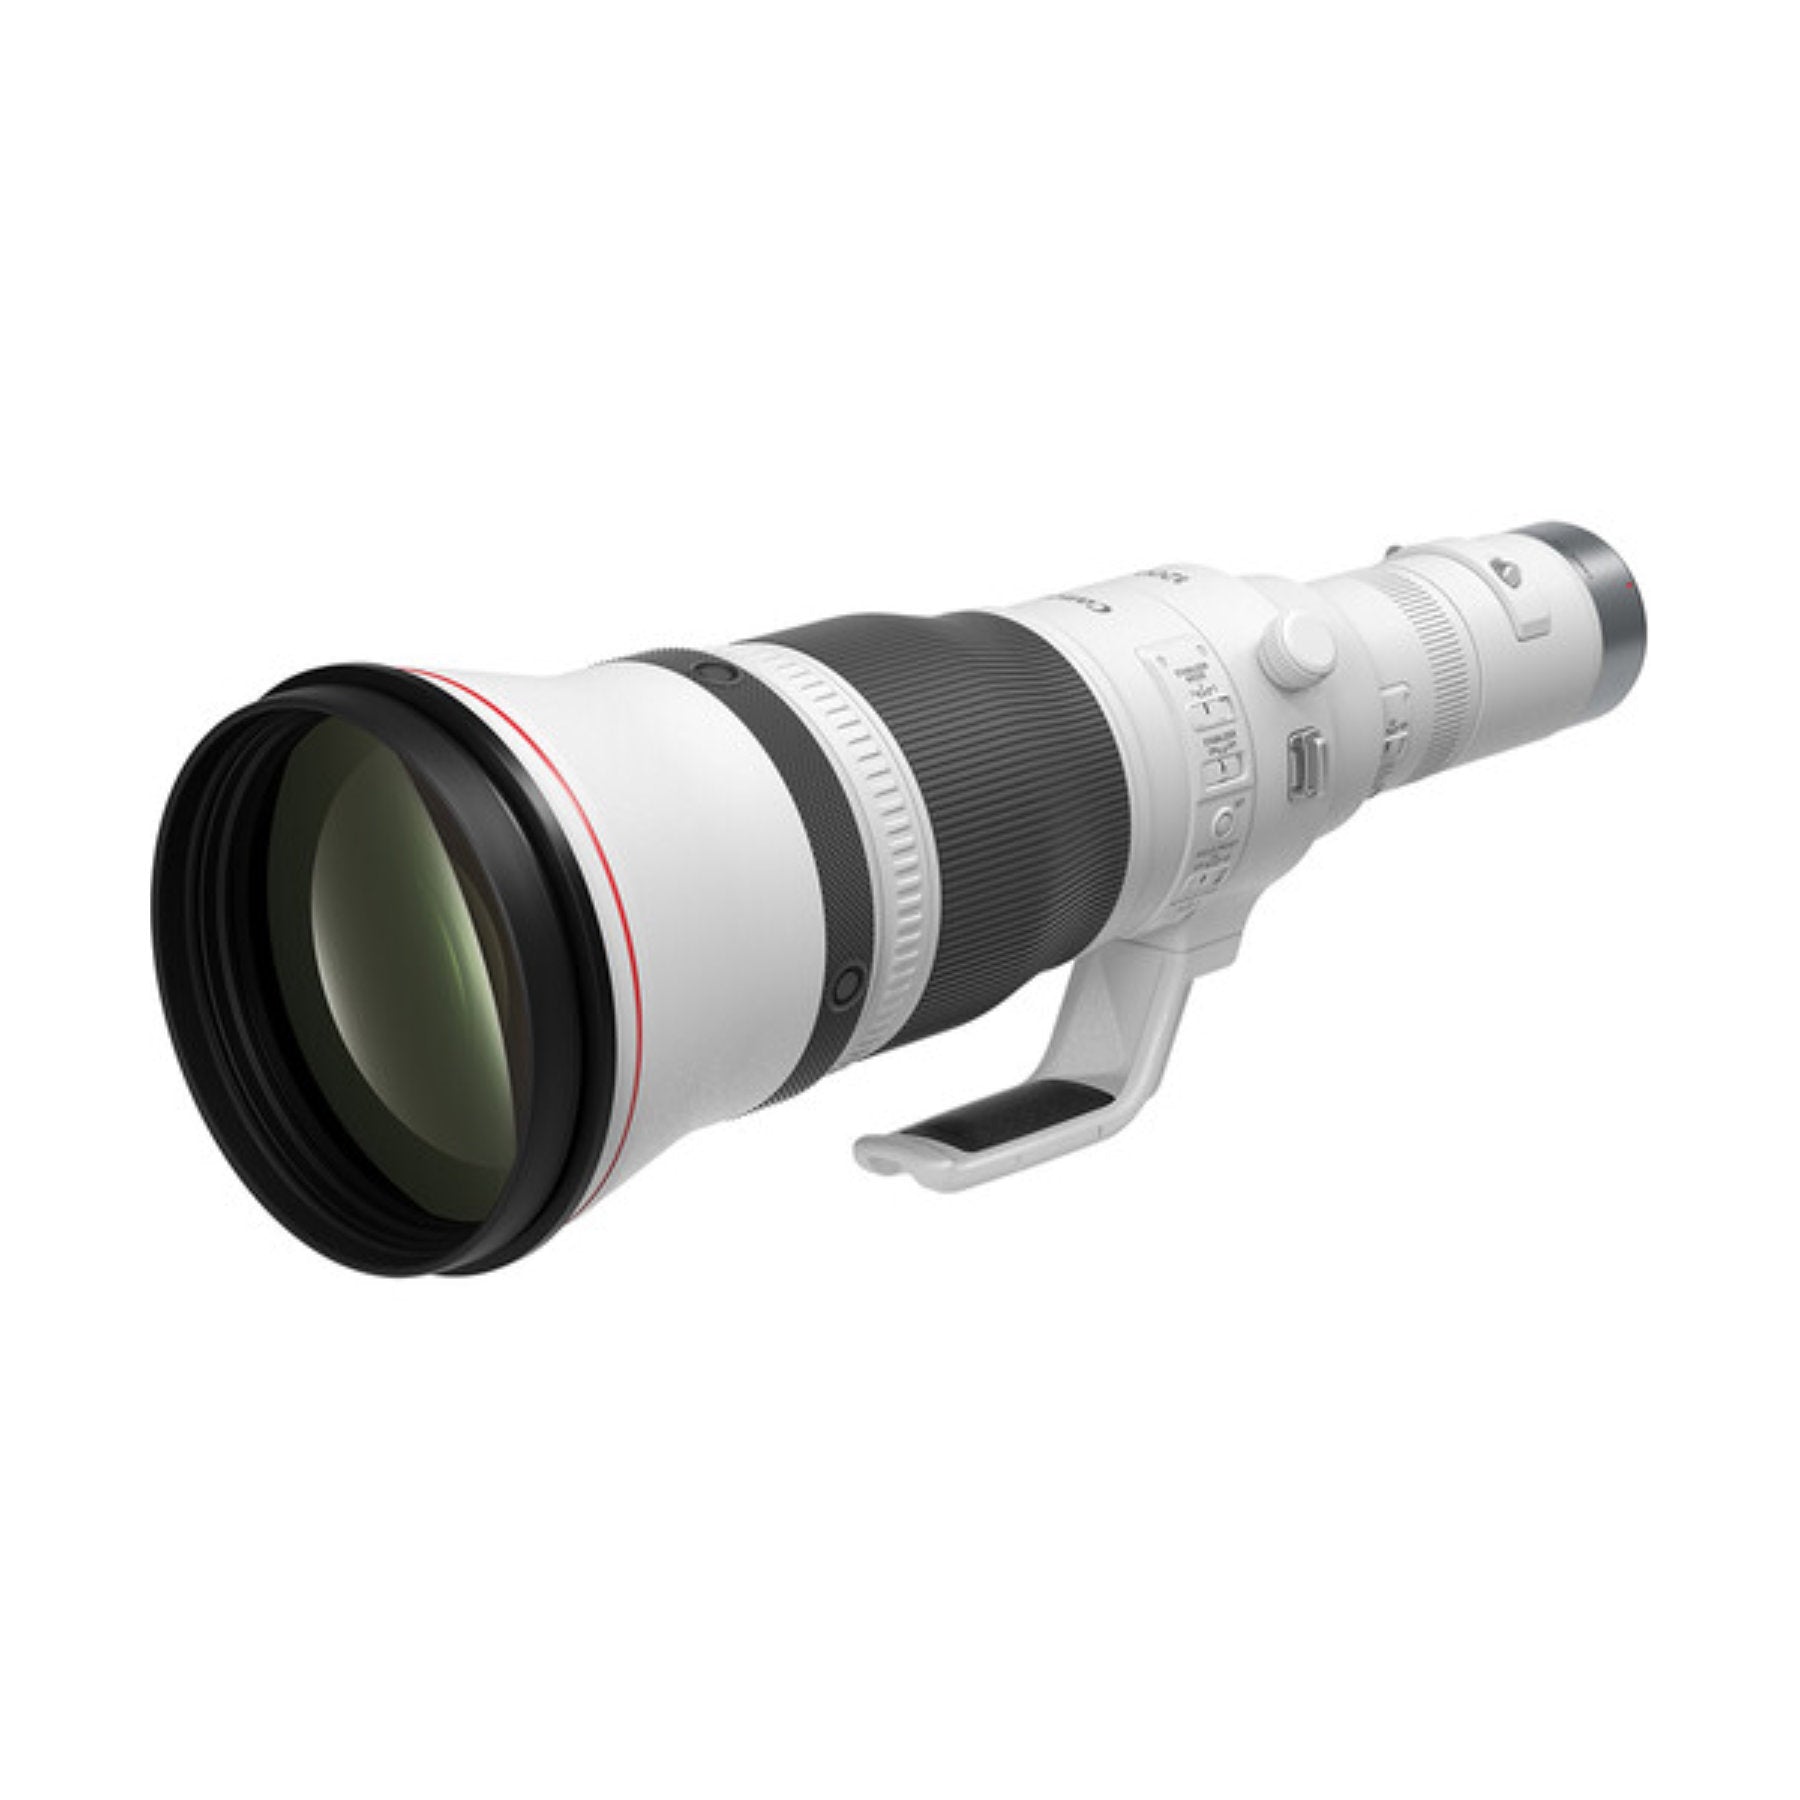 Buy Canon RF 1200mm f/8L IS USM RF Mount Lens at Topic Store